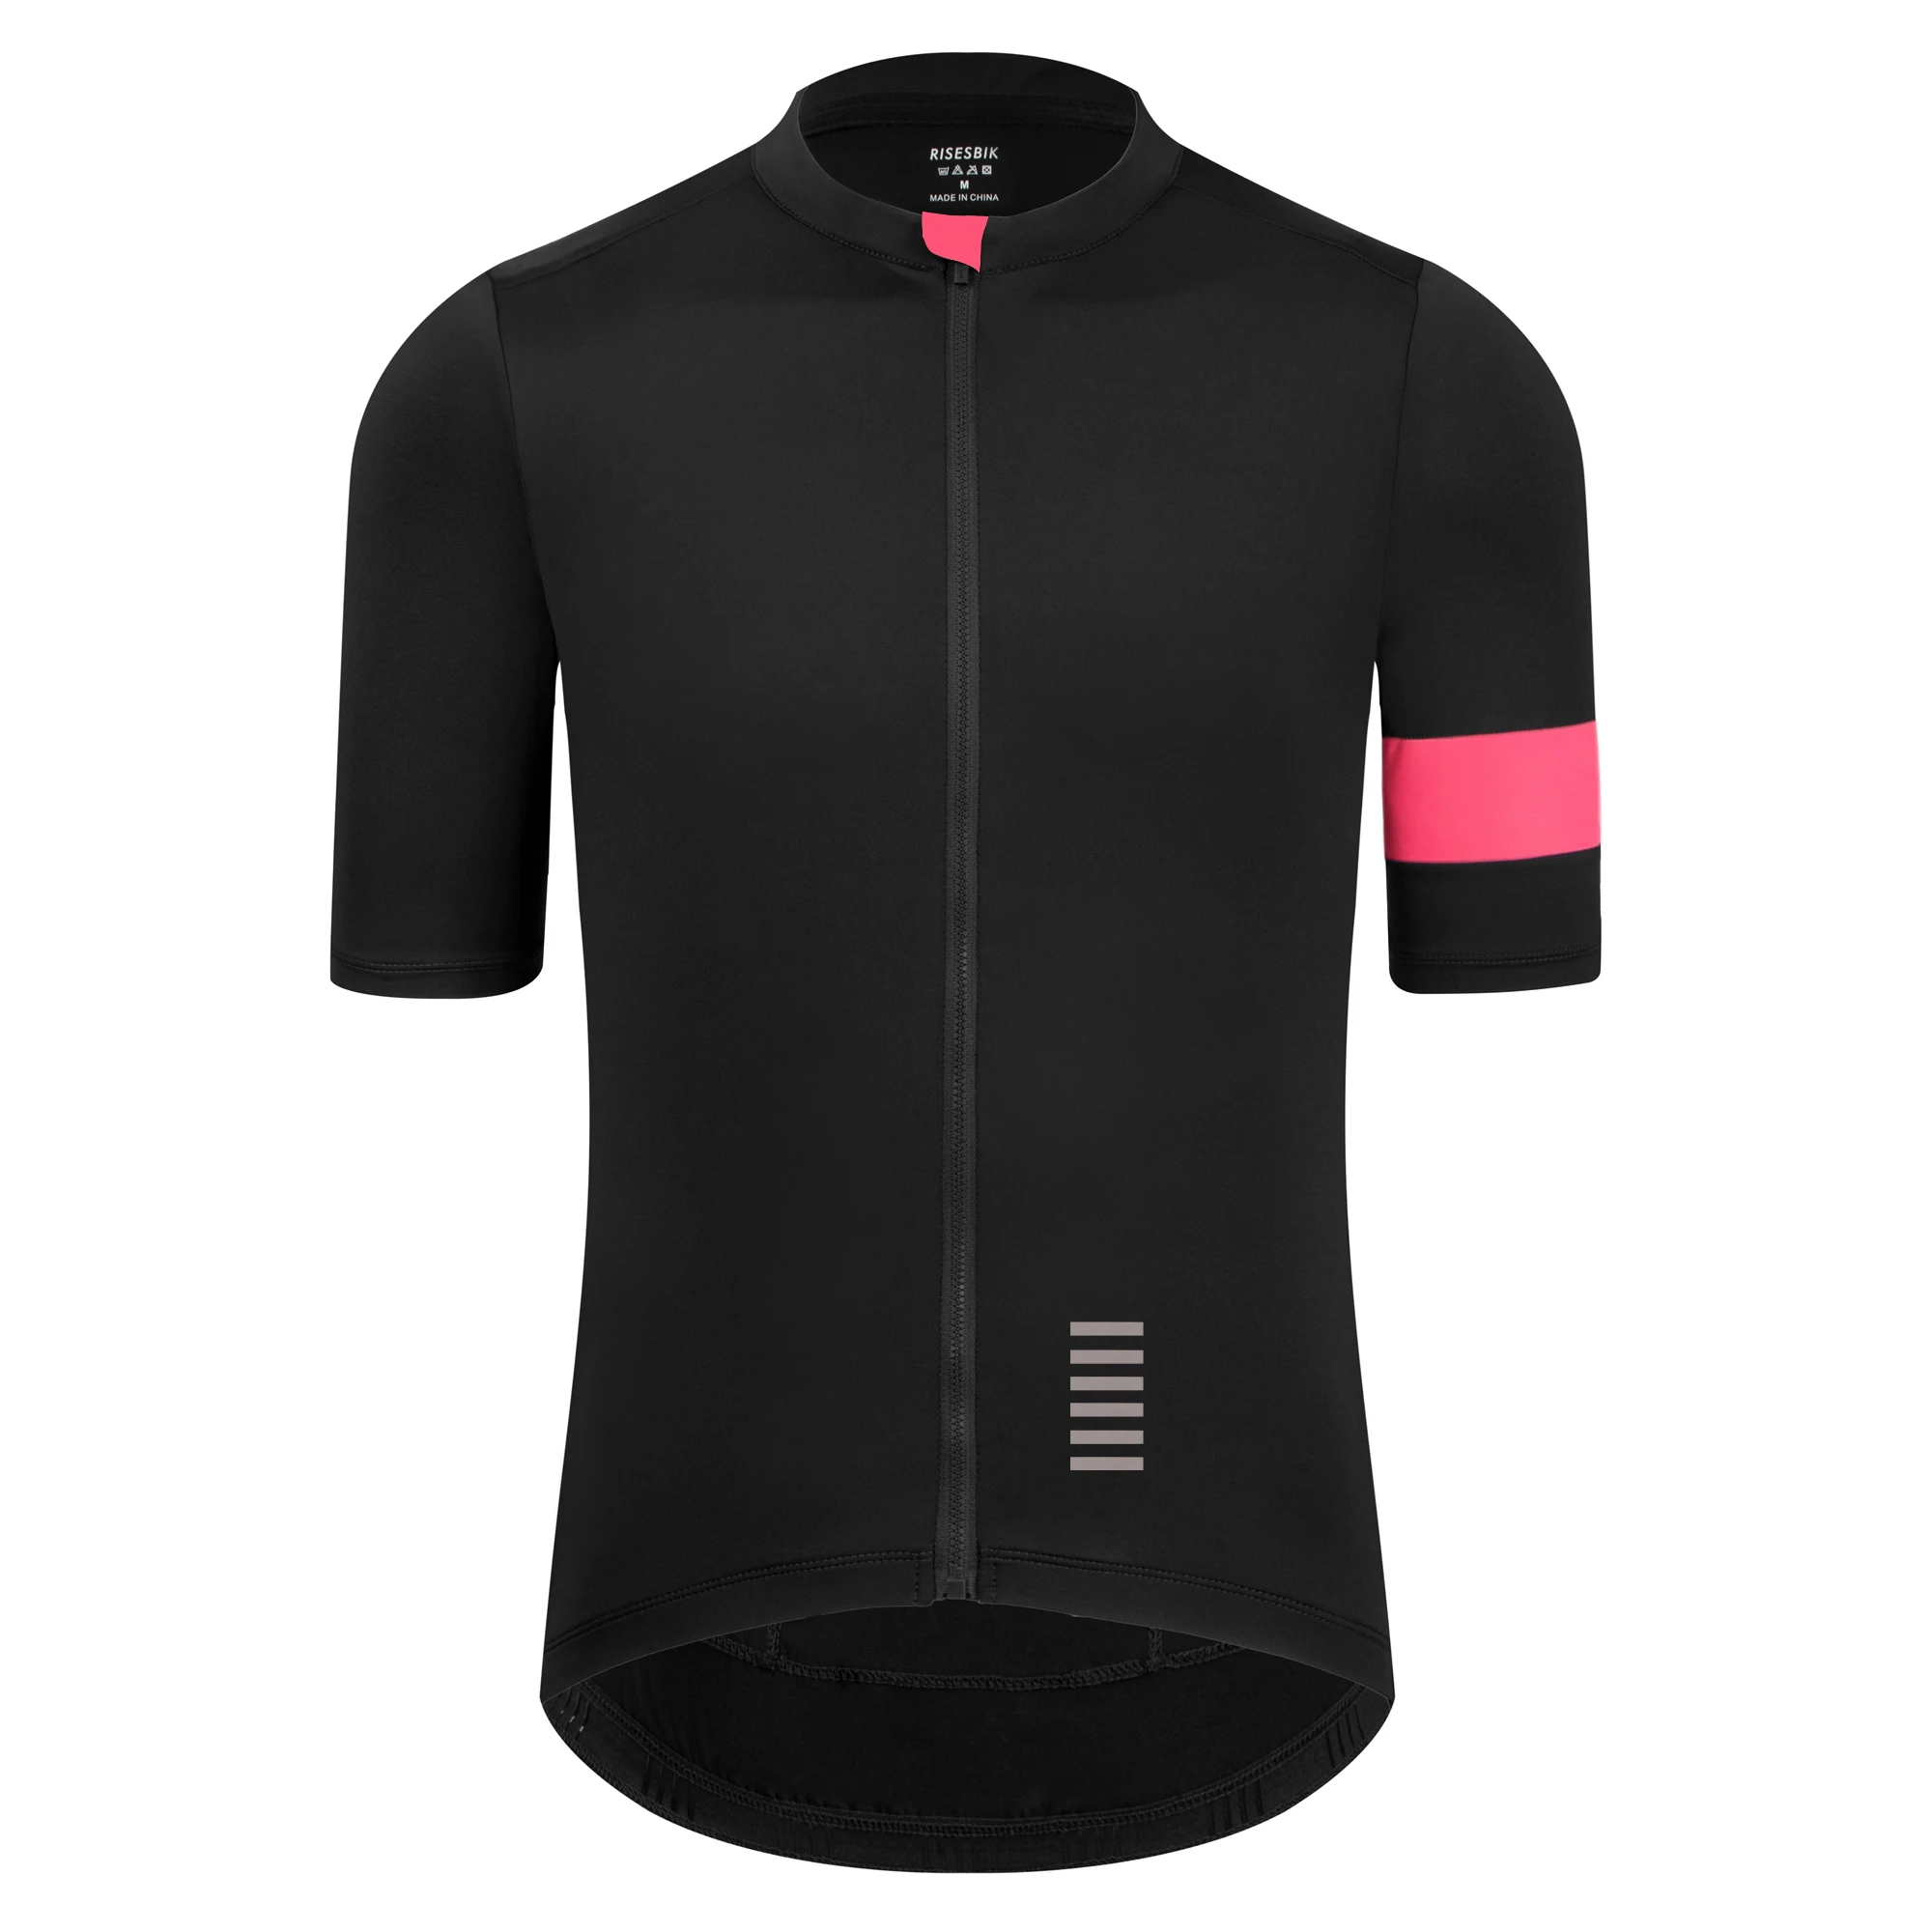 

RISESBIK High Quality Areo Race Fit Men's Cycling Clothing Short Sleeves Cycling Jersey Shirt Maillot Ciclismo Road Bike Jersey